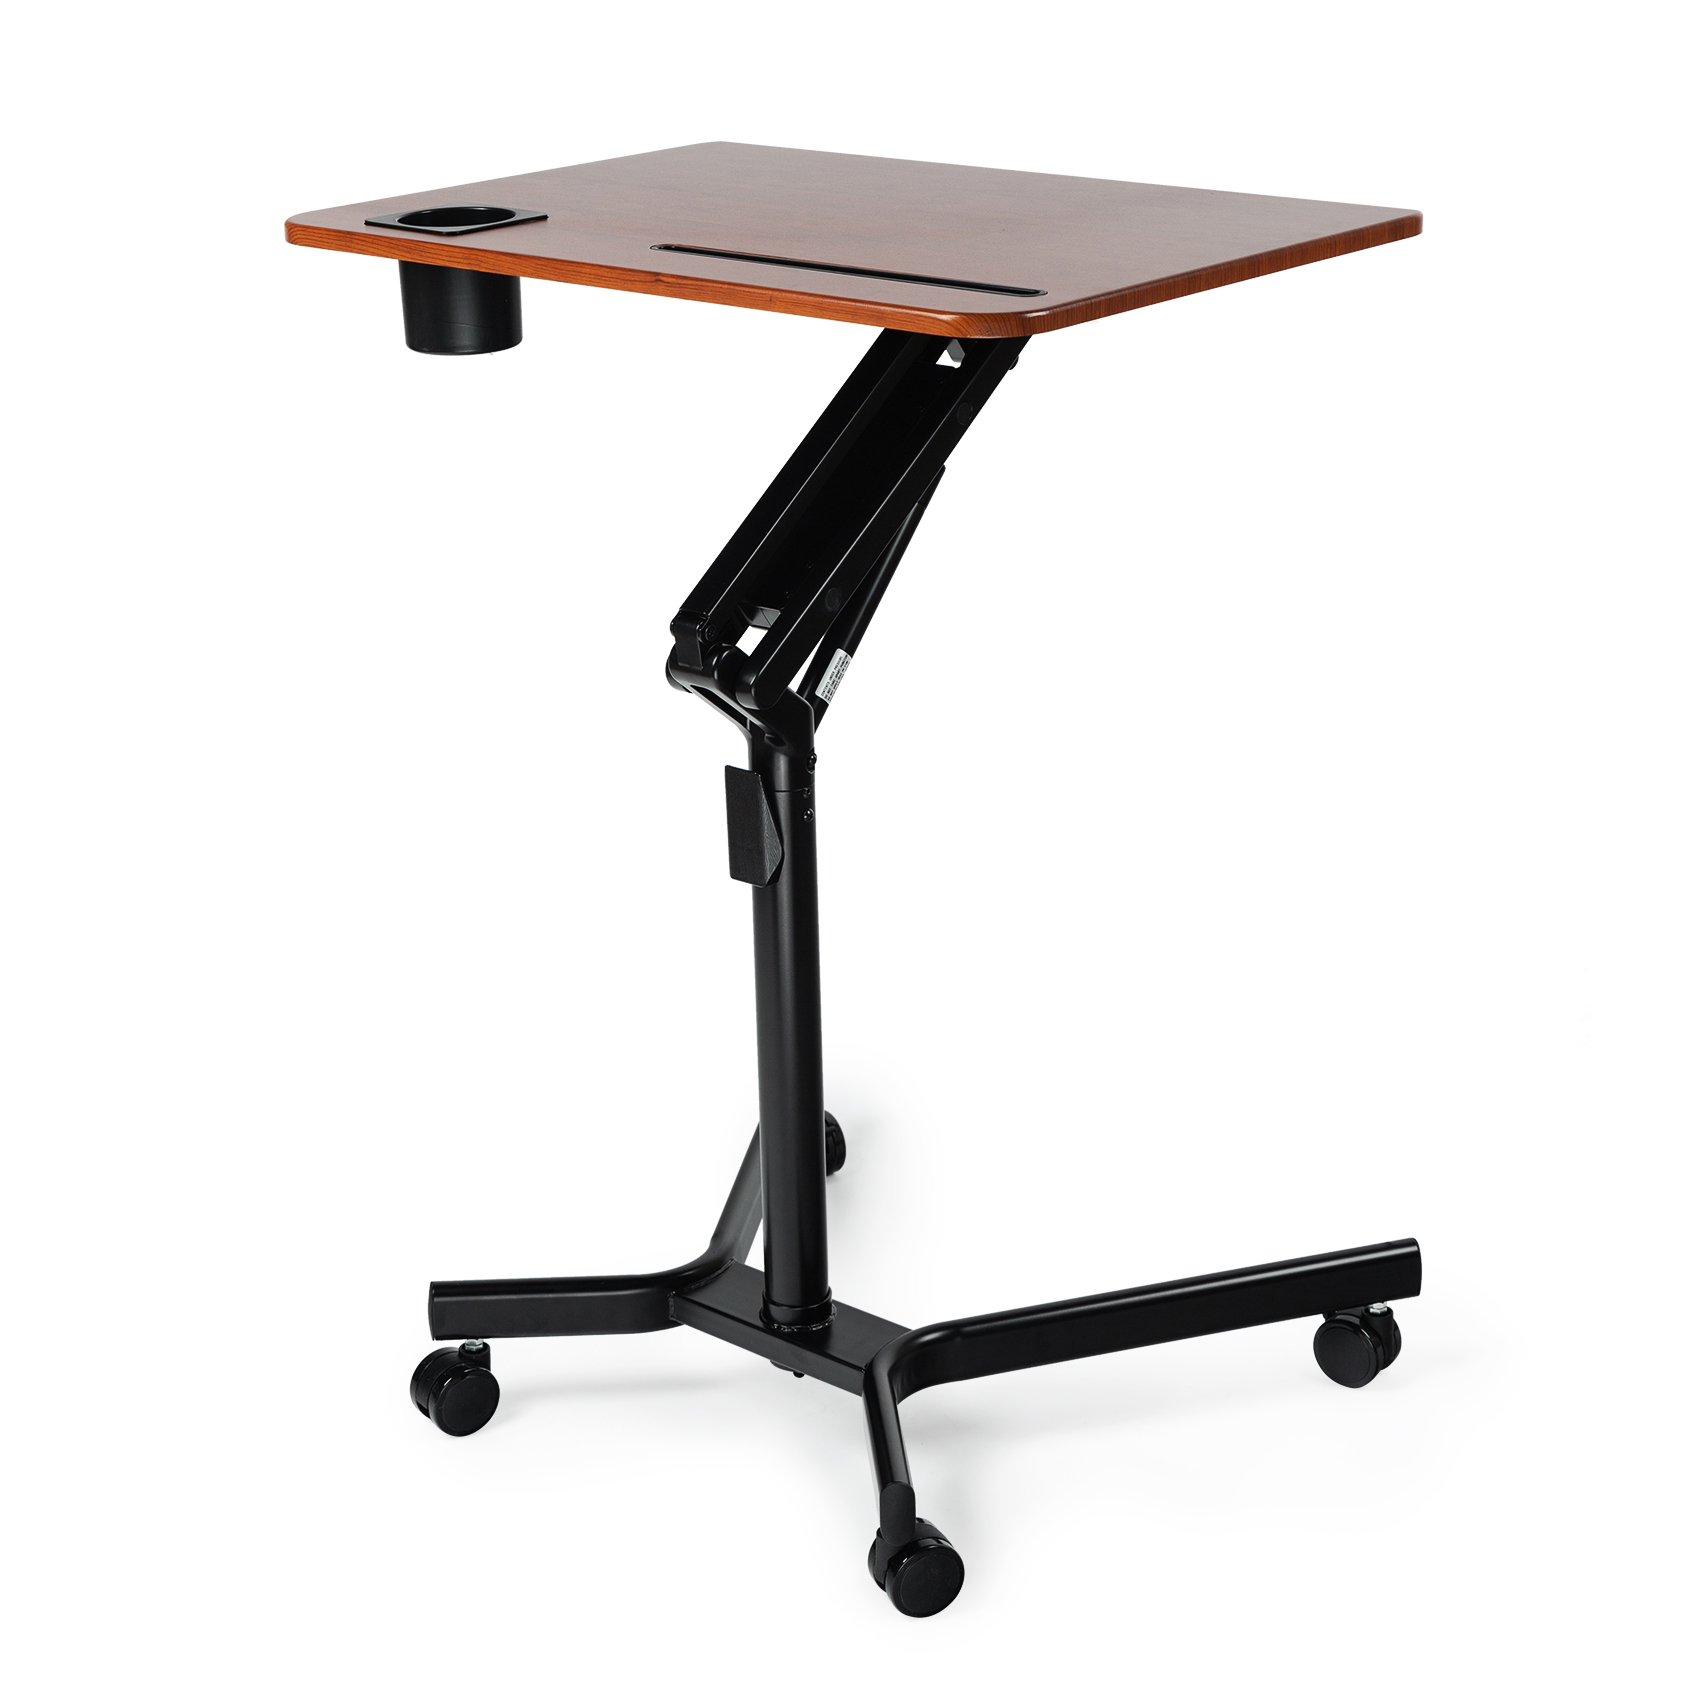 【Video Provided】Adjustable Height Pneumatic Standing or Sitting Laptop Desk 27.6 inches,Modern Style Home Office Workstation ,Black frame /Walnut color Table Top-Boyel Living